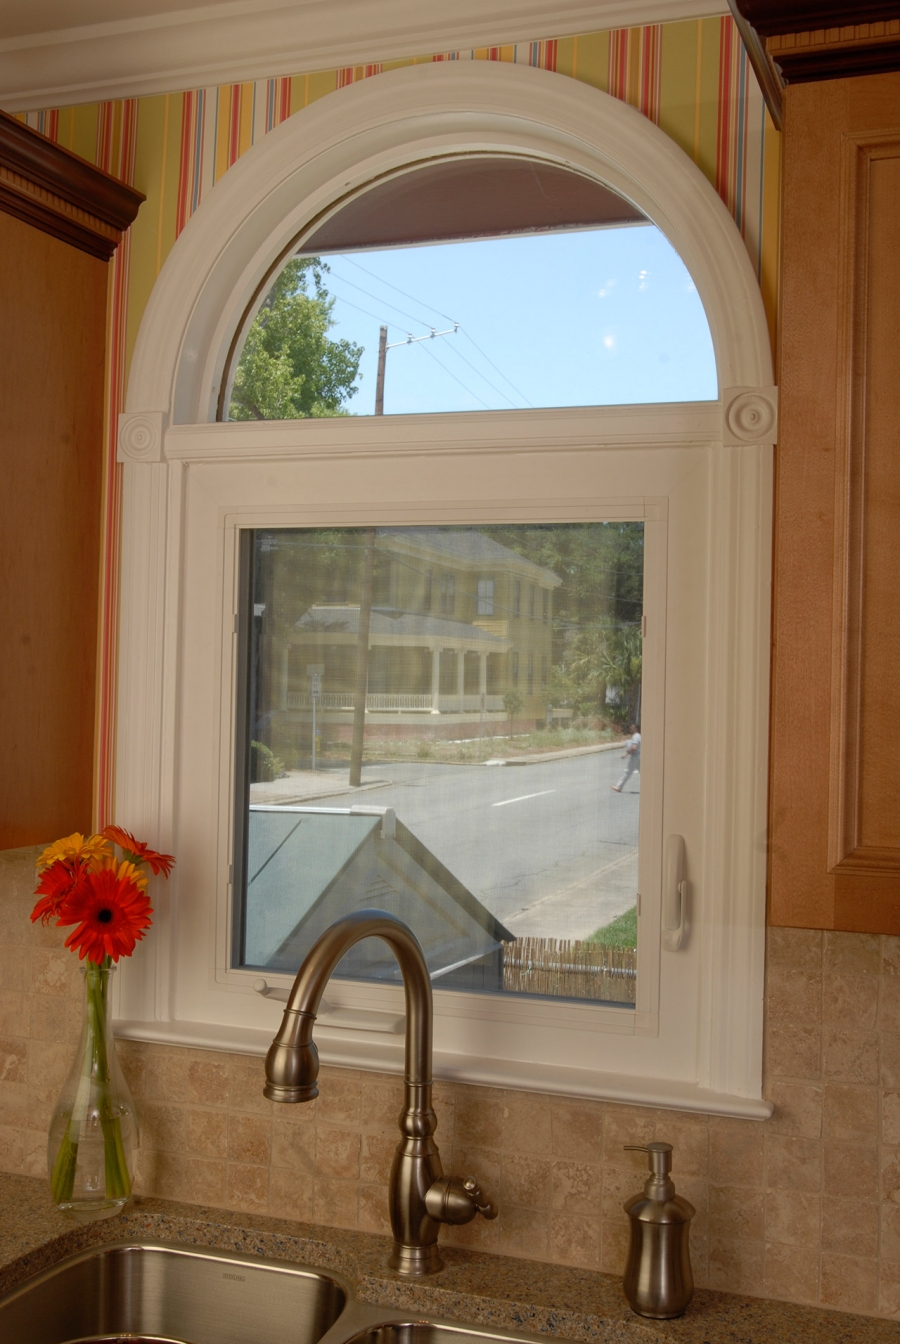 Simonton Windows Ranks “Highest in Customer Satisfaction with Windows and Doors” in J.D. Power Study Four Years in a Row